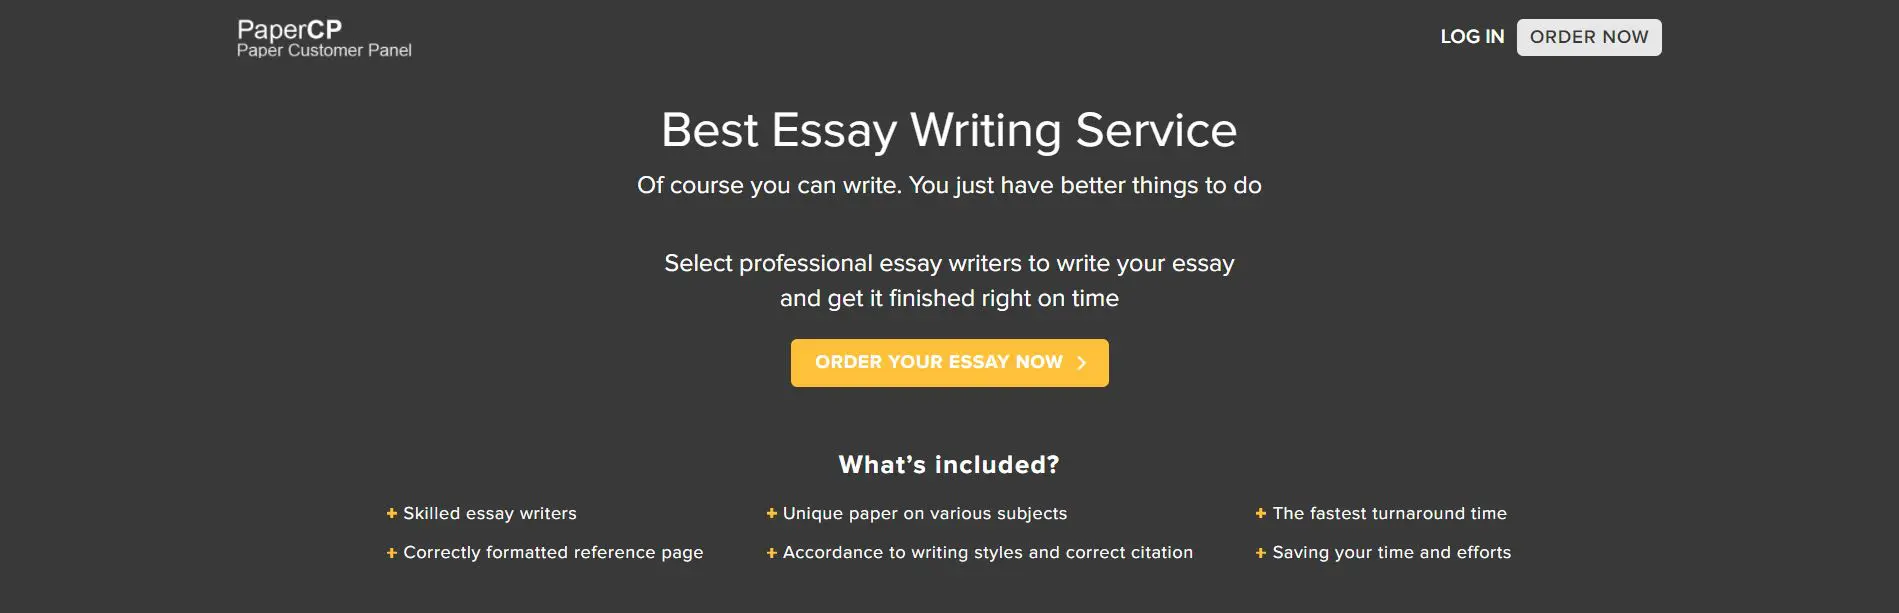 online essay writers! 10 Tricks The Competition Knows, But You Don't